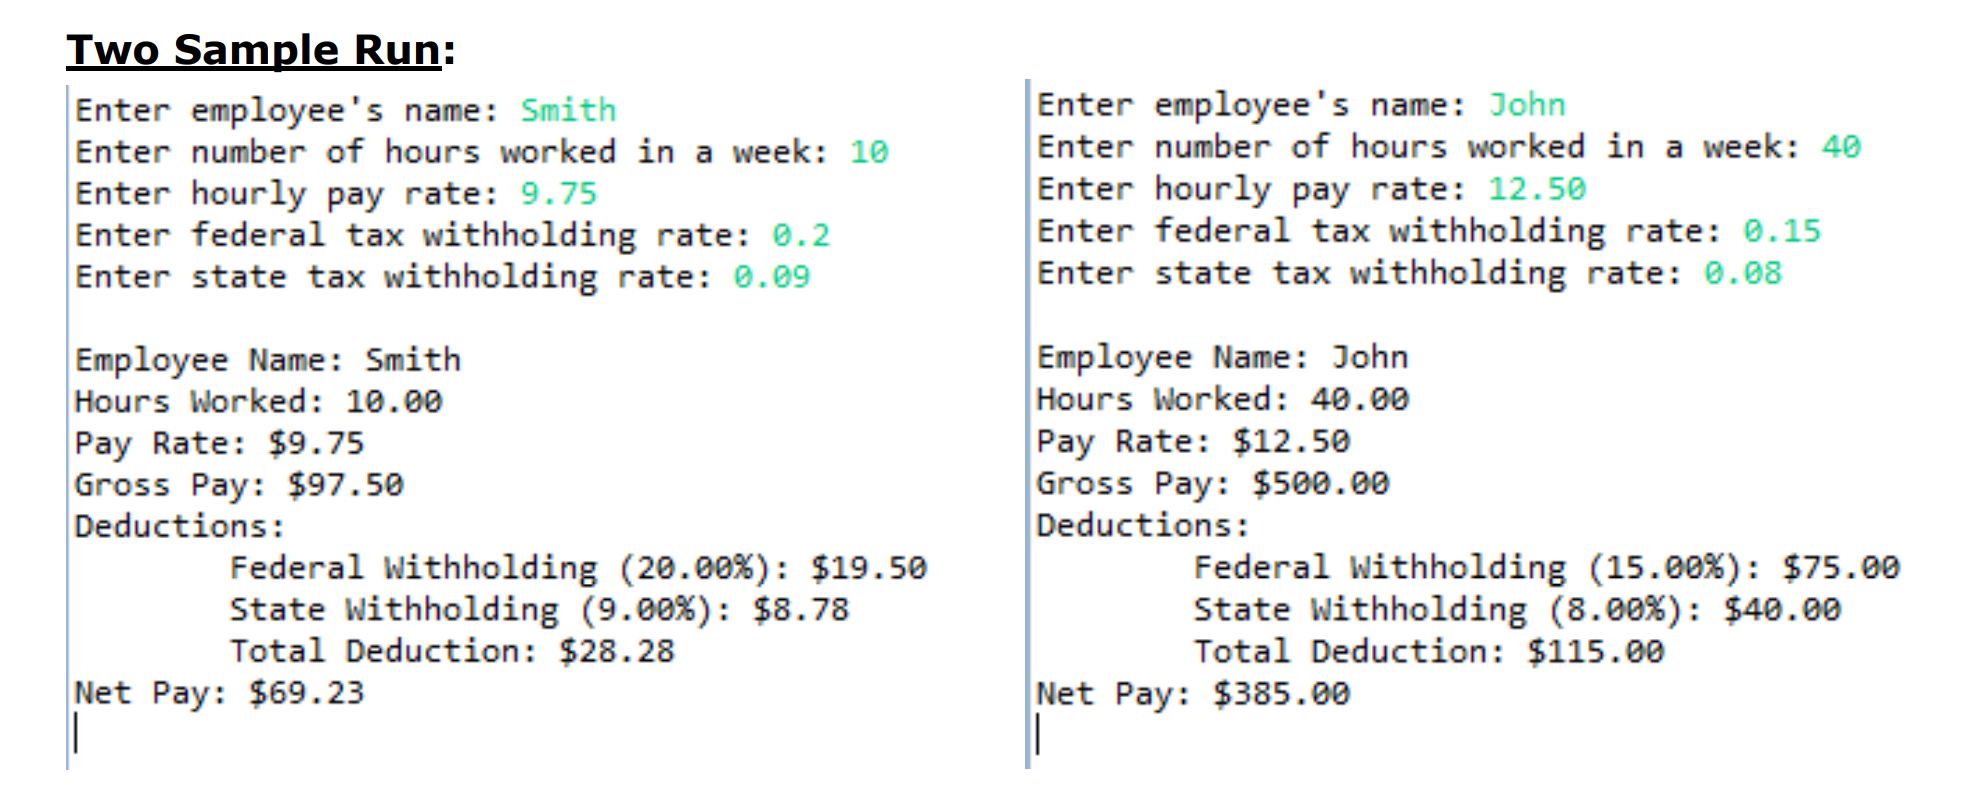 Two Sample Run:
Enter emplovee's name: Smith
Enter number of hours worked in a week: 10
Enter hourly pay rate: 9.75
Enter federal tax withholding rate: 0.2
Enter state tax withholding rate: 0.09
Enter employee's name: John
Enter number of hours worked in a week: 40
Enter hourly pay rate: 12.50
Enter federal tax withholding rate: 0.15
Enter state tax withholding rate: 0.08
Employee Name: Smith
Hours Worked 10.00
Pay Rate: $9.75
Gross Pay: $97.50
Deductions:
Employee Name: John
Hours Worked: 40.00
Pay Rate: $12.50
Gross Pay: $500.00
Deductions:
Federal withholding (20.00%): $19.50
state withholding (9.00%): $8.78
Total Deduction: $28.28
Federal withholding (15.00%): $75.00
state withholding (8.00%); $48.00
Total Deduction: $115.00
Net Pay: $69.23
Net Pay: $385.00
